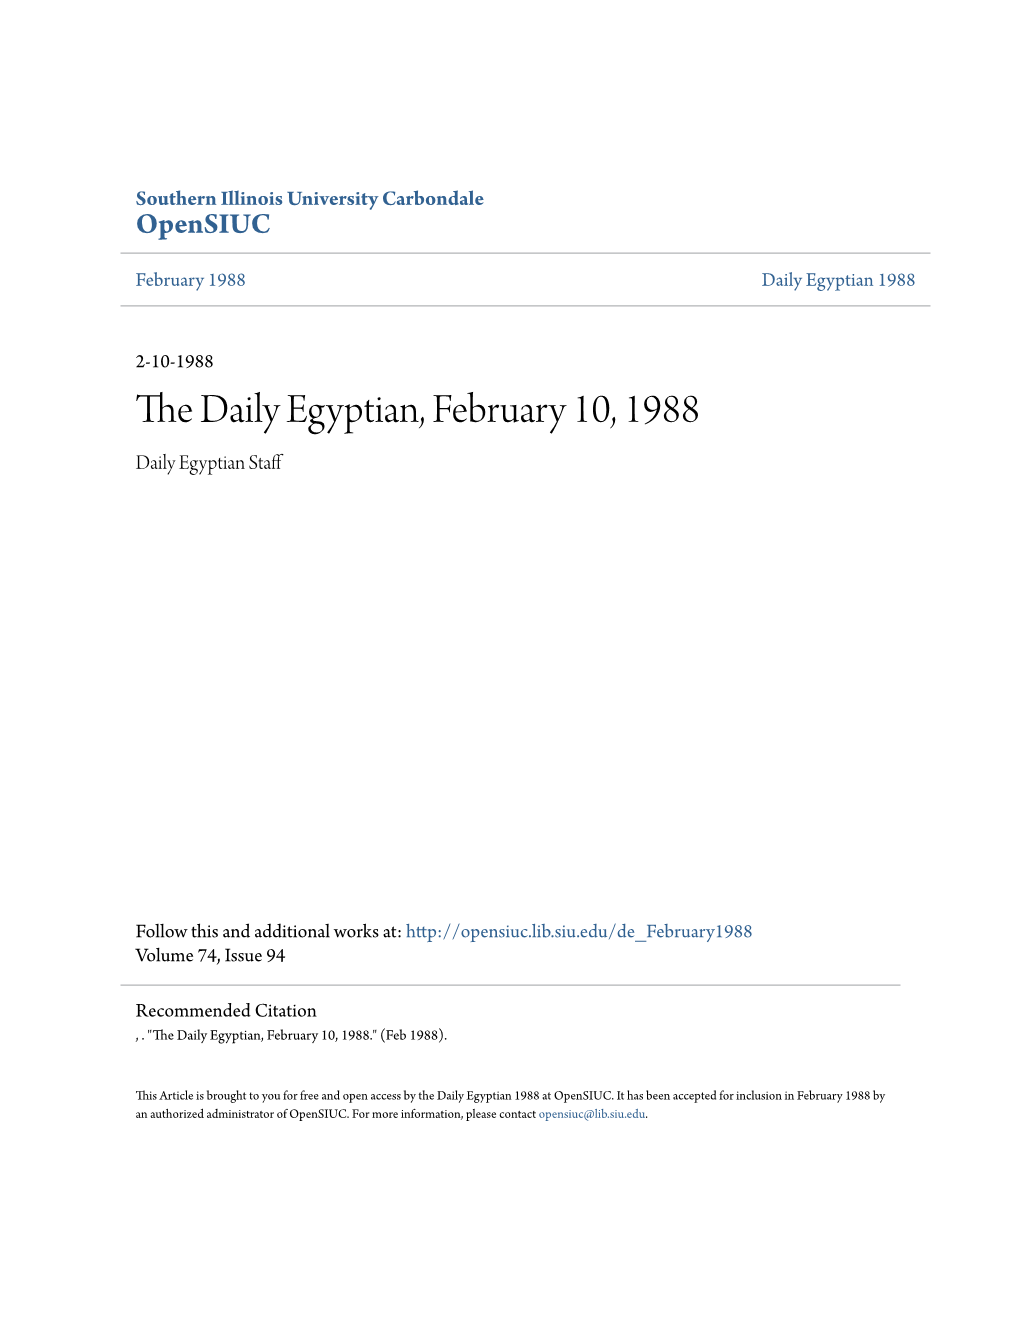 The Daily Egyptian, February 10, 1988